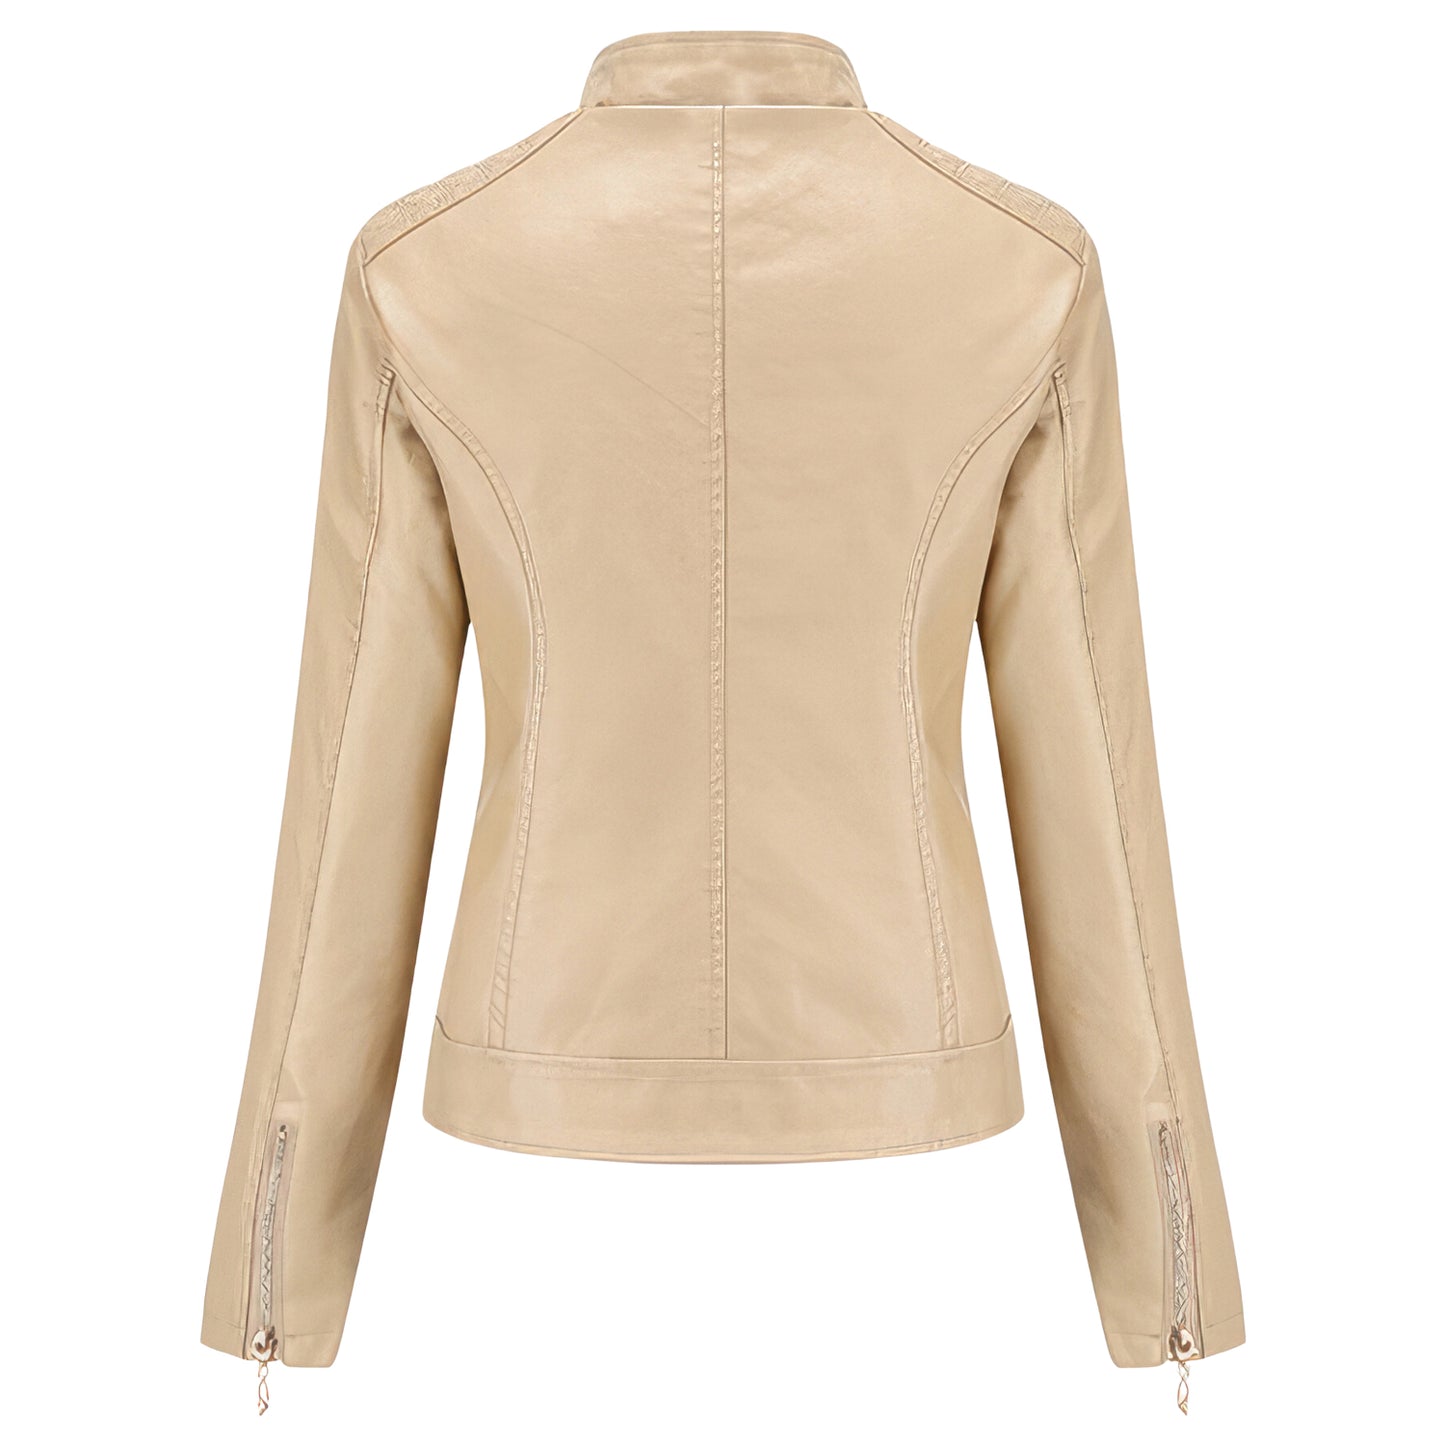 Women’s Beige Biker Genuine Sheepskin Stand Collar Quilted Fashionable Outfit Motorcycle Café Racer Leather Jacket